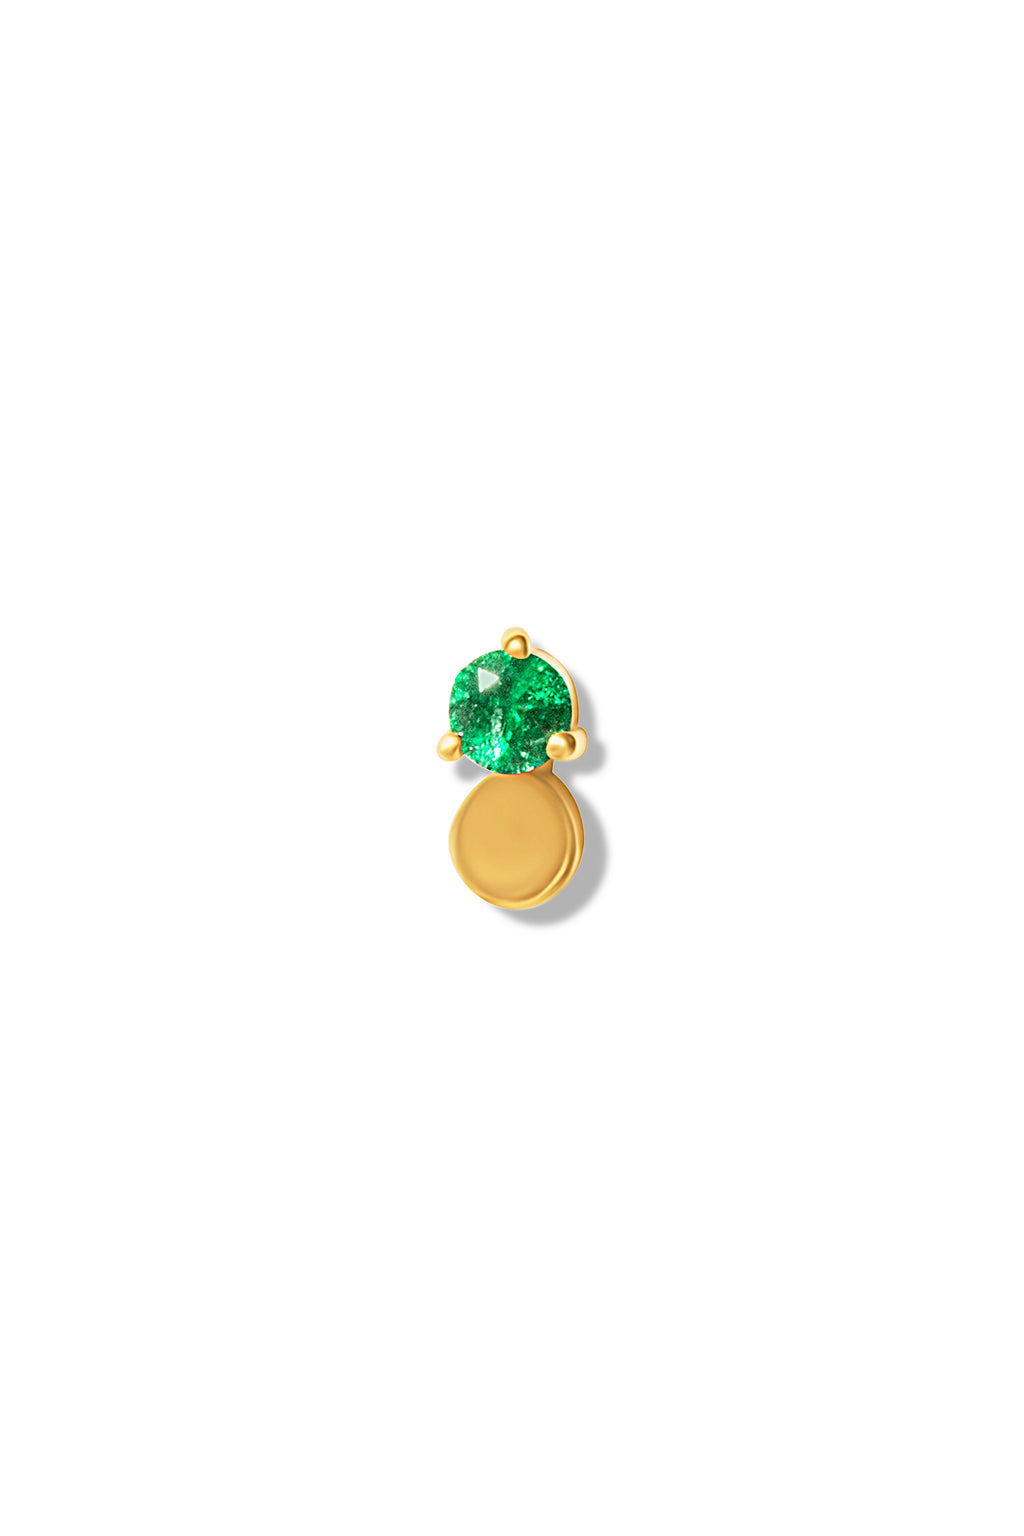 A 14K yellow gold stud earring featuring a round emerald gemstone set in a prong setting at the top, with a small gold disc dangling below. 